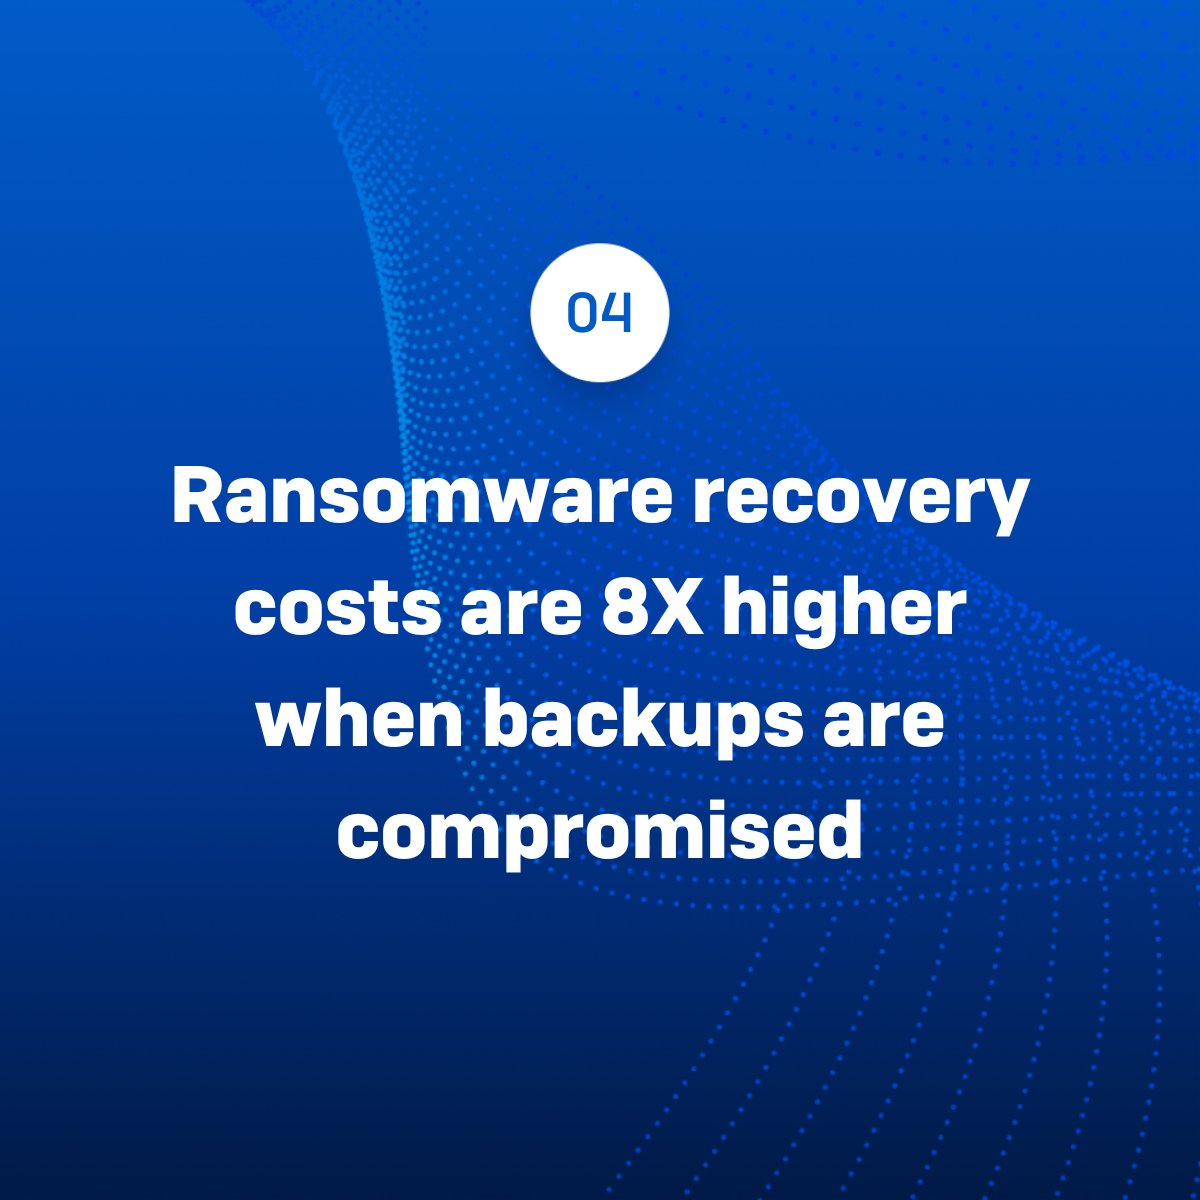 What happens when #ransomware actors compromise your backups? Most organizations feel they have no choice but to pay the ransom. Cybercriminals attempted to compromise backups in 94% of attacks last year. Learn how to enhance your #DataSecurity: bit.ly/3vZvNtS